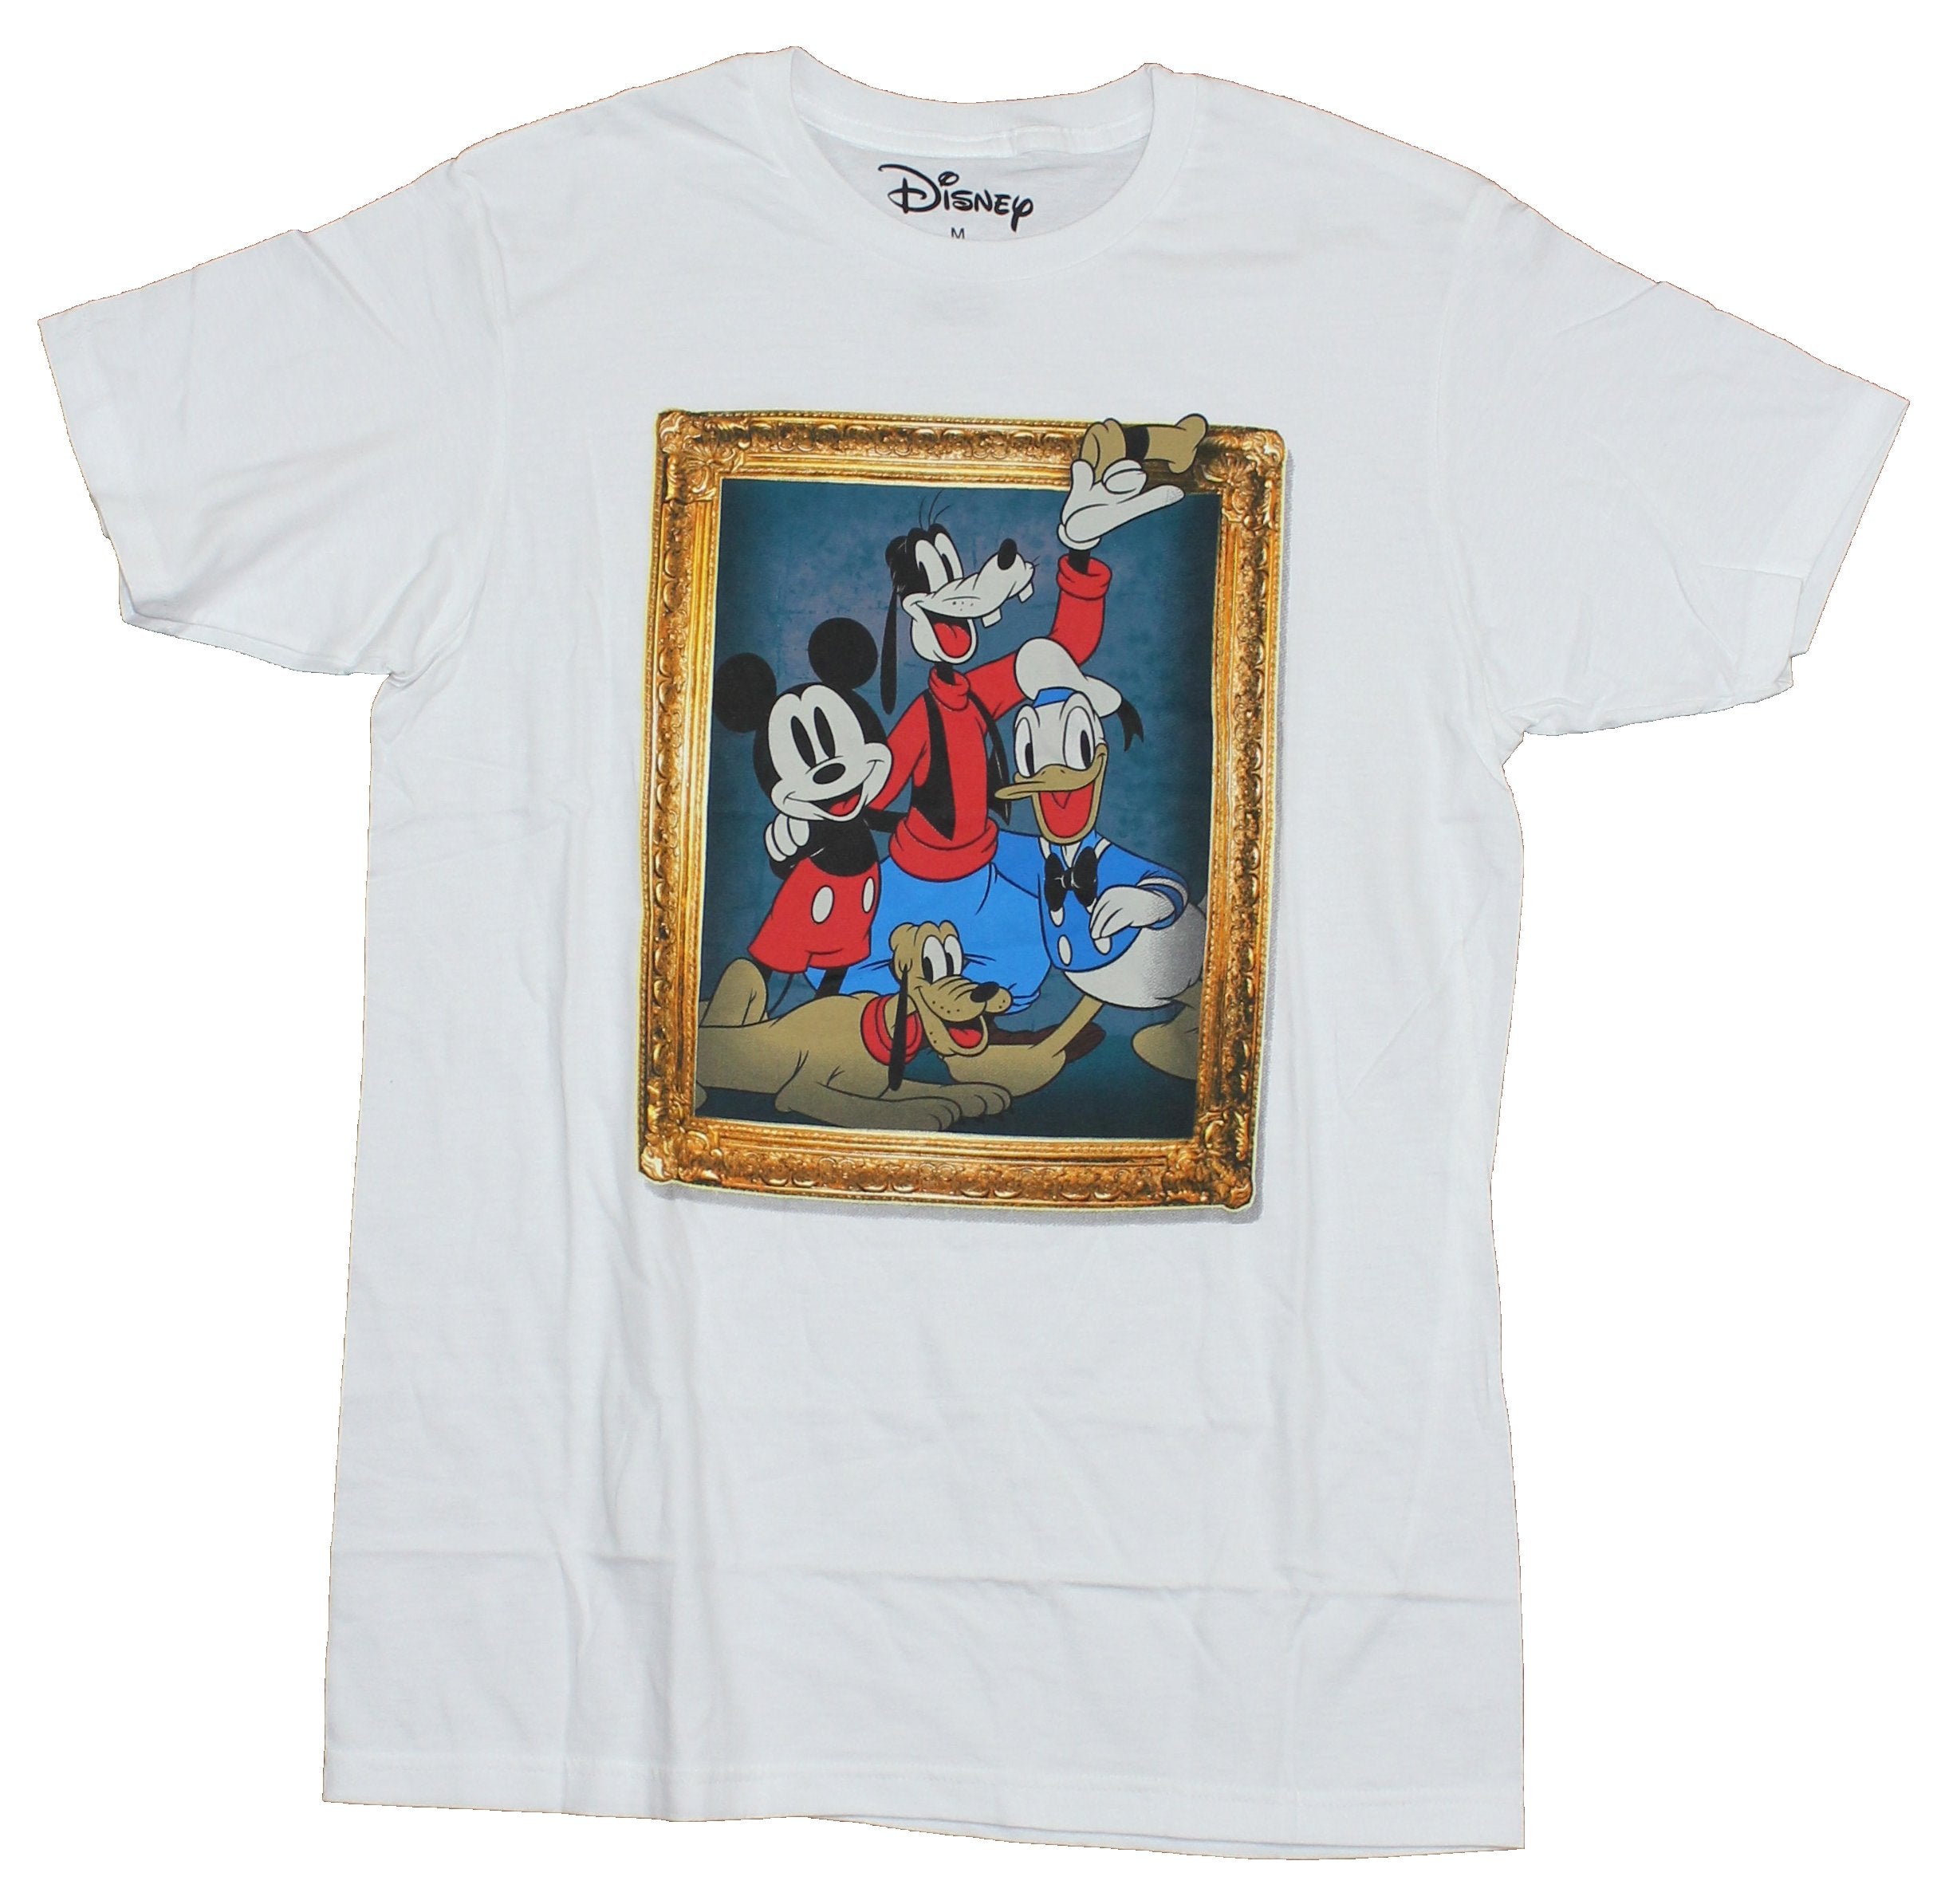 Disney Mens T-Shirt -  Mickey Mouse Goofy Donald Duck Framed Pictured